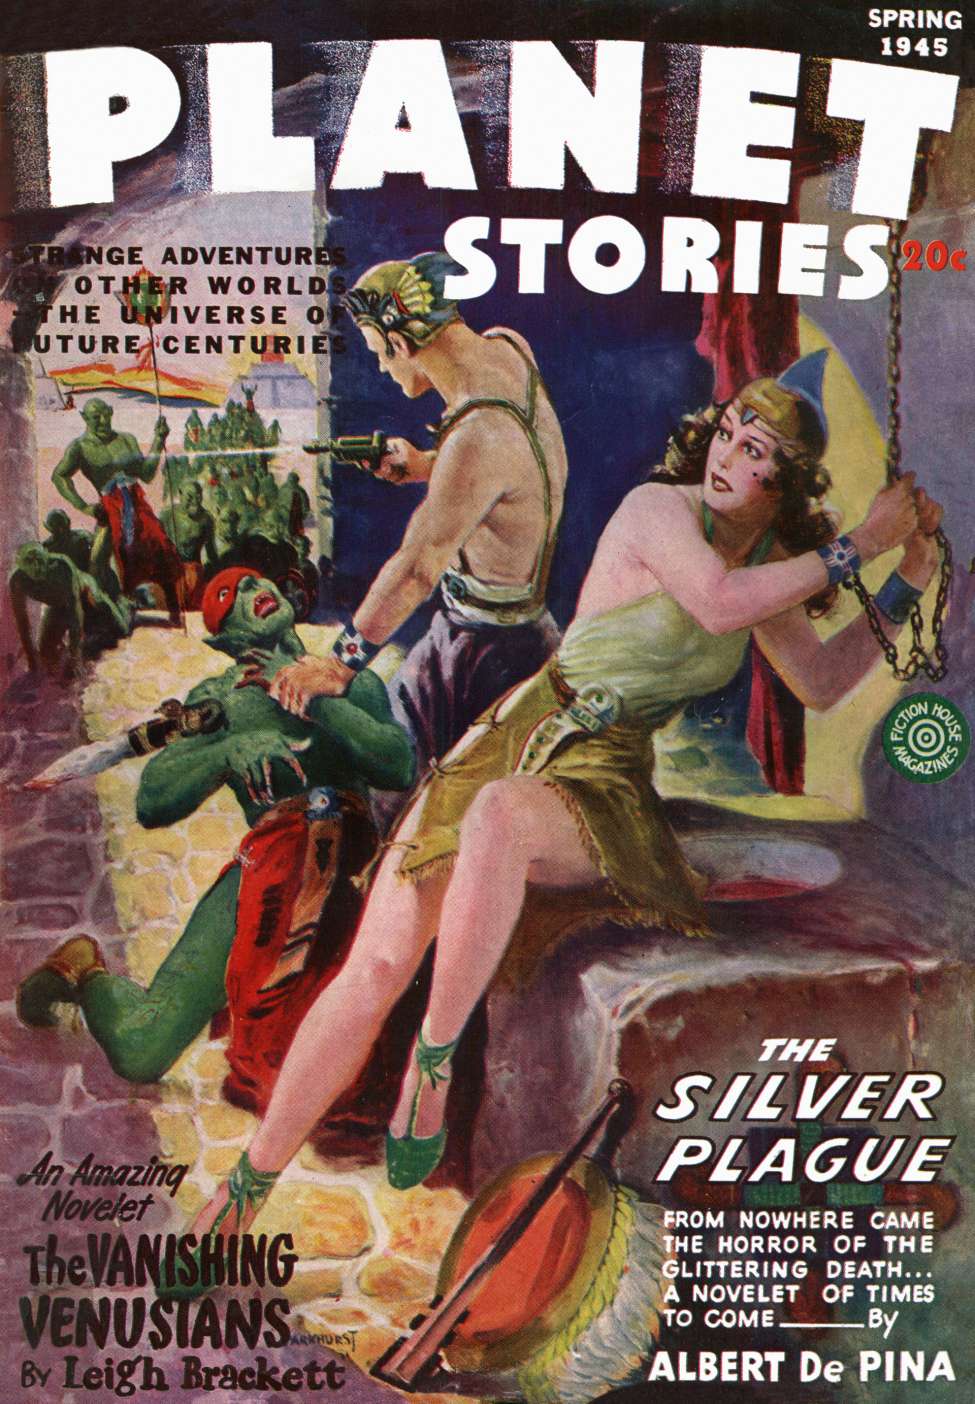 Comic Book Cover For Planet Stories v2 10 - The Silver Plague - Albert dePina